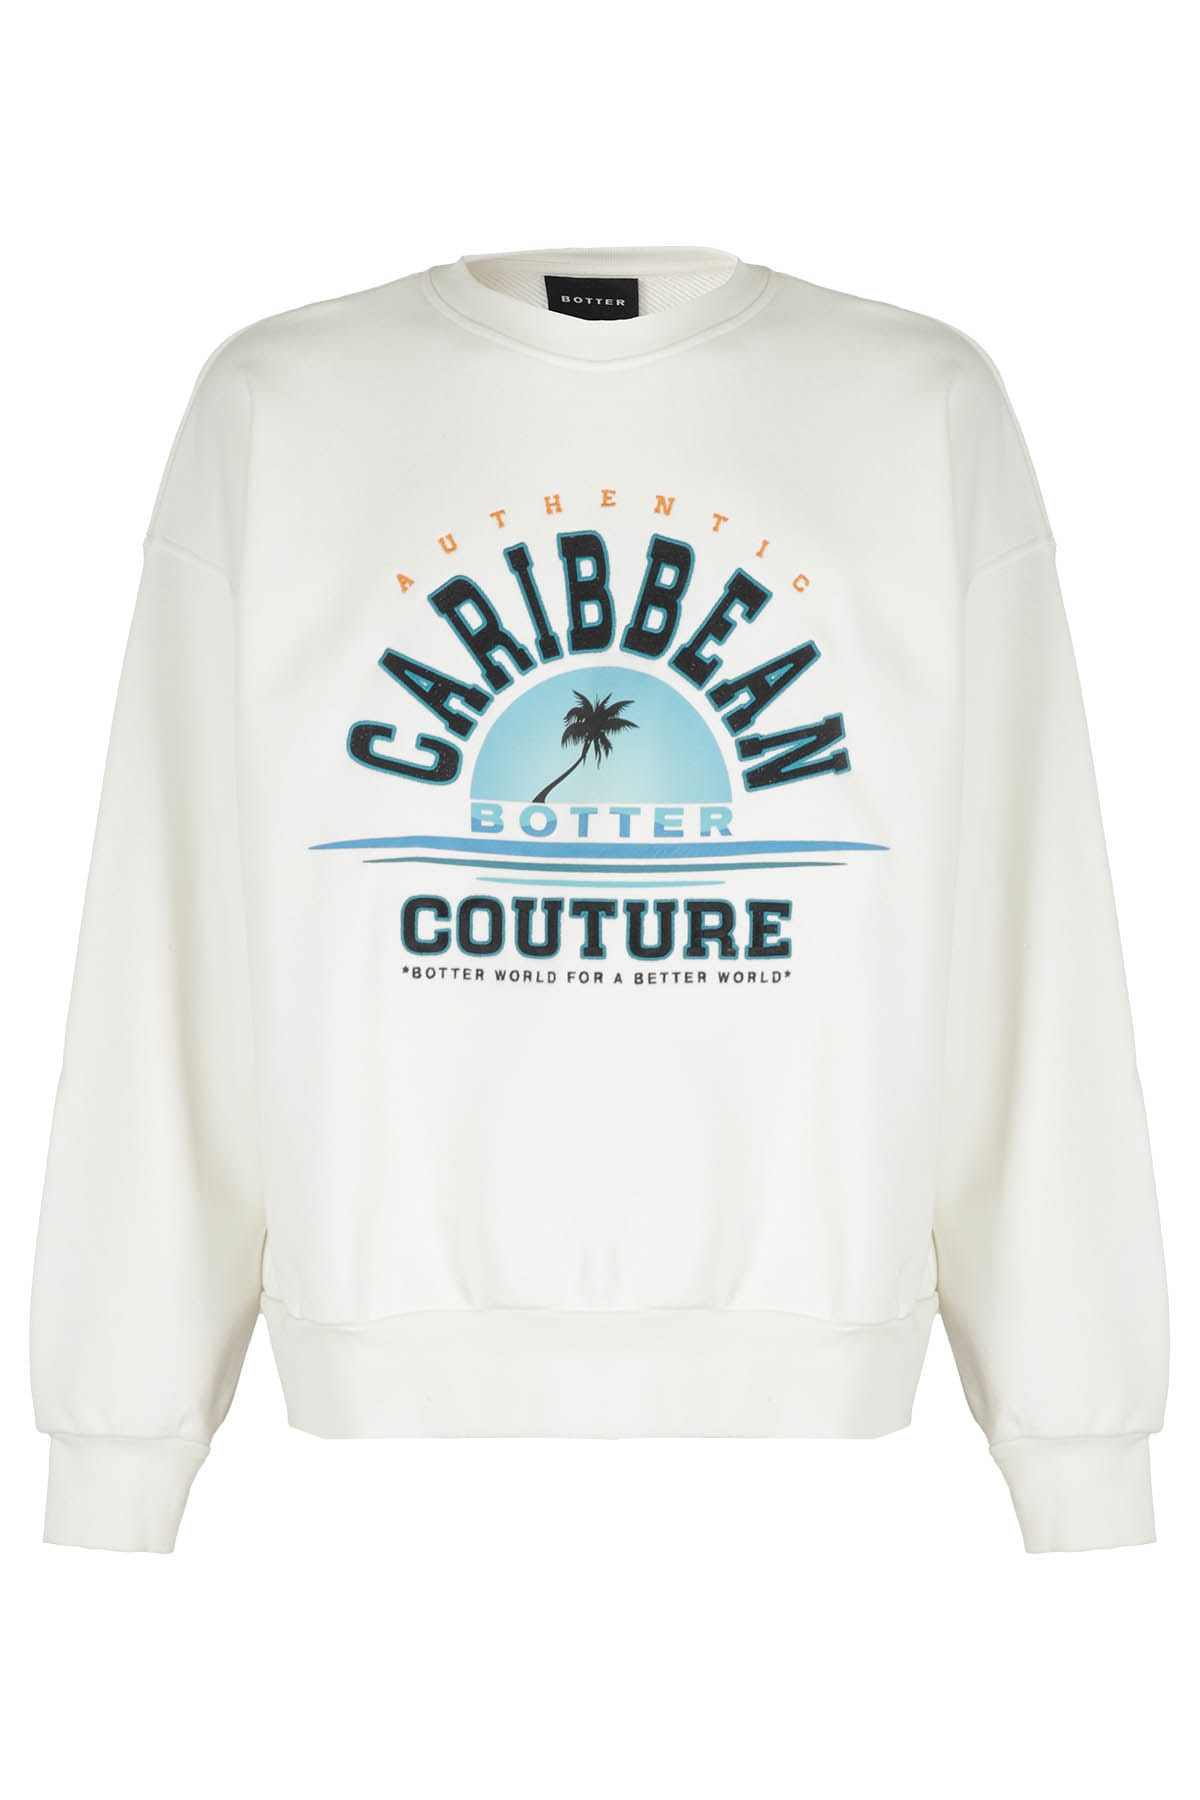 Shop Botter Crewneck Sweater Caribbean In White College